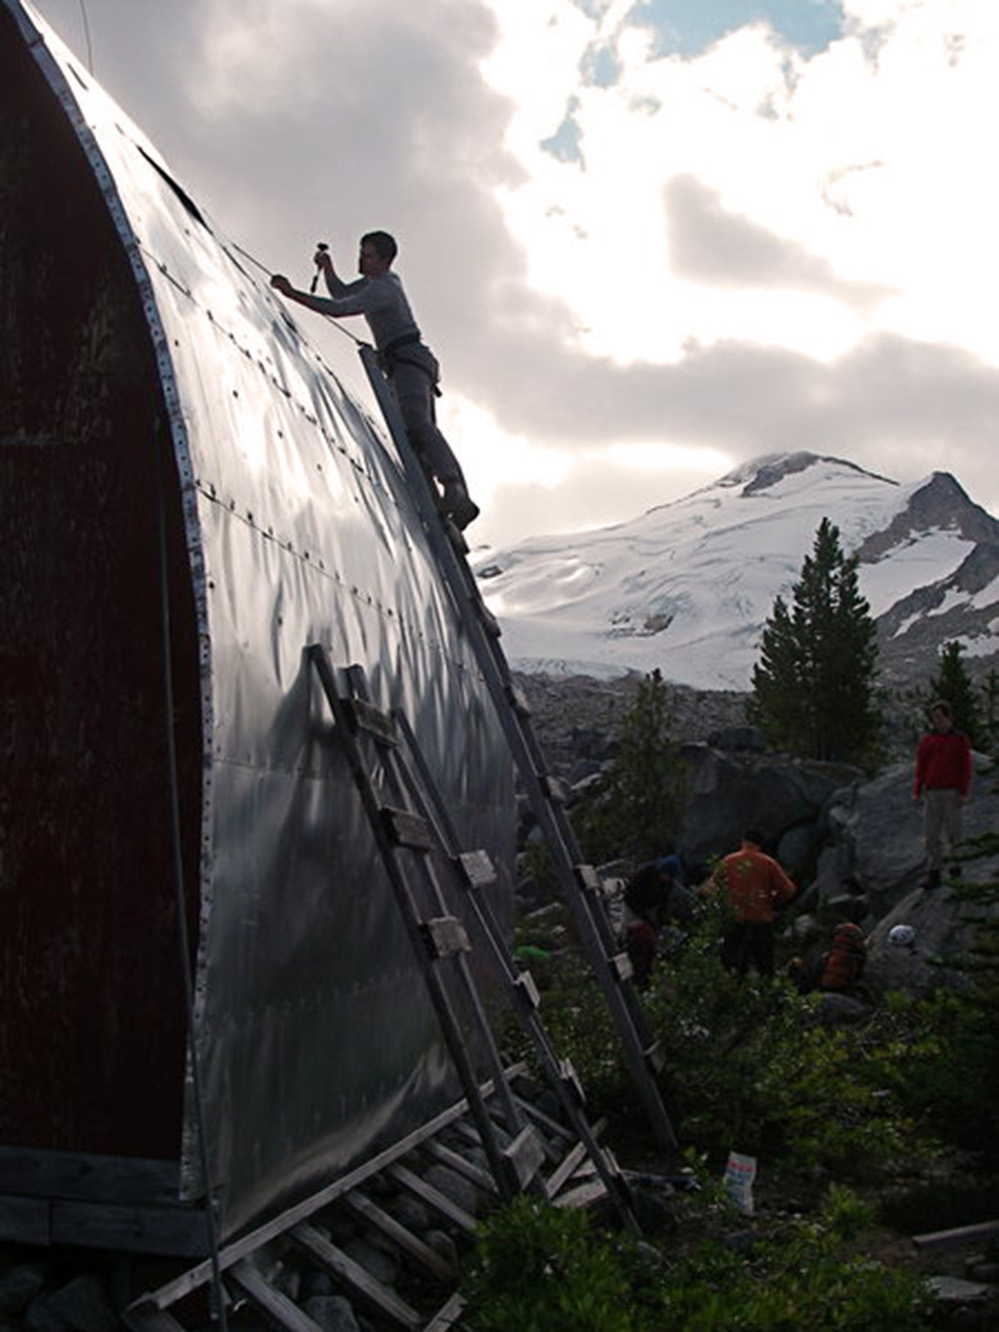 A man standing at the top of a hand built wooden ladder is inspecting the aluminum siding covering the roof. Other Club members can be seen standing behind near green evergreen trees. A steep snow covered slope looms in the background.